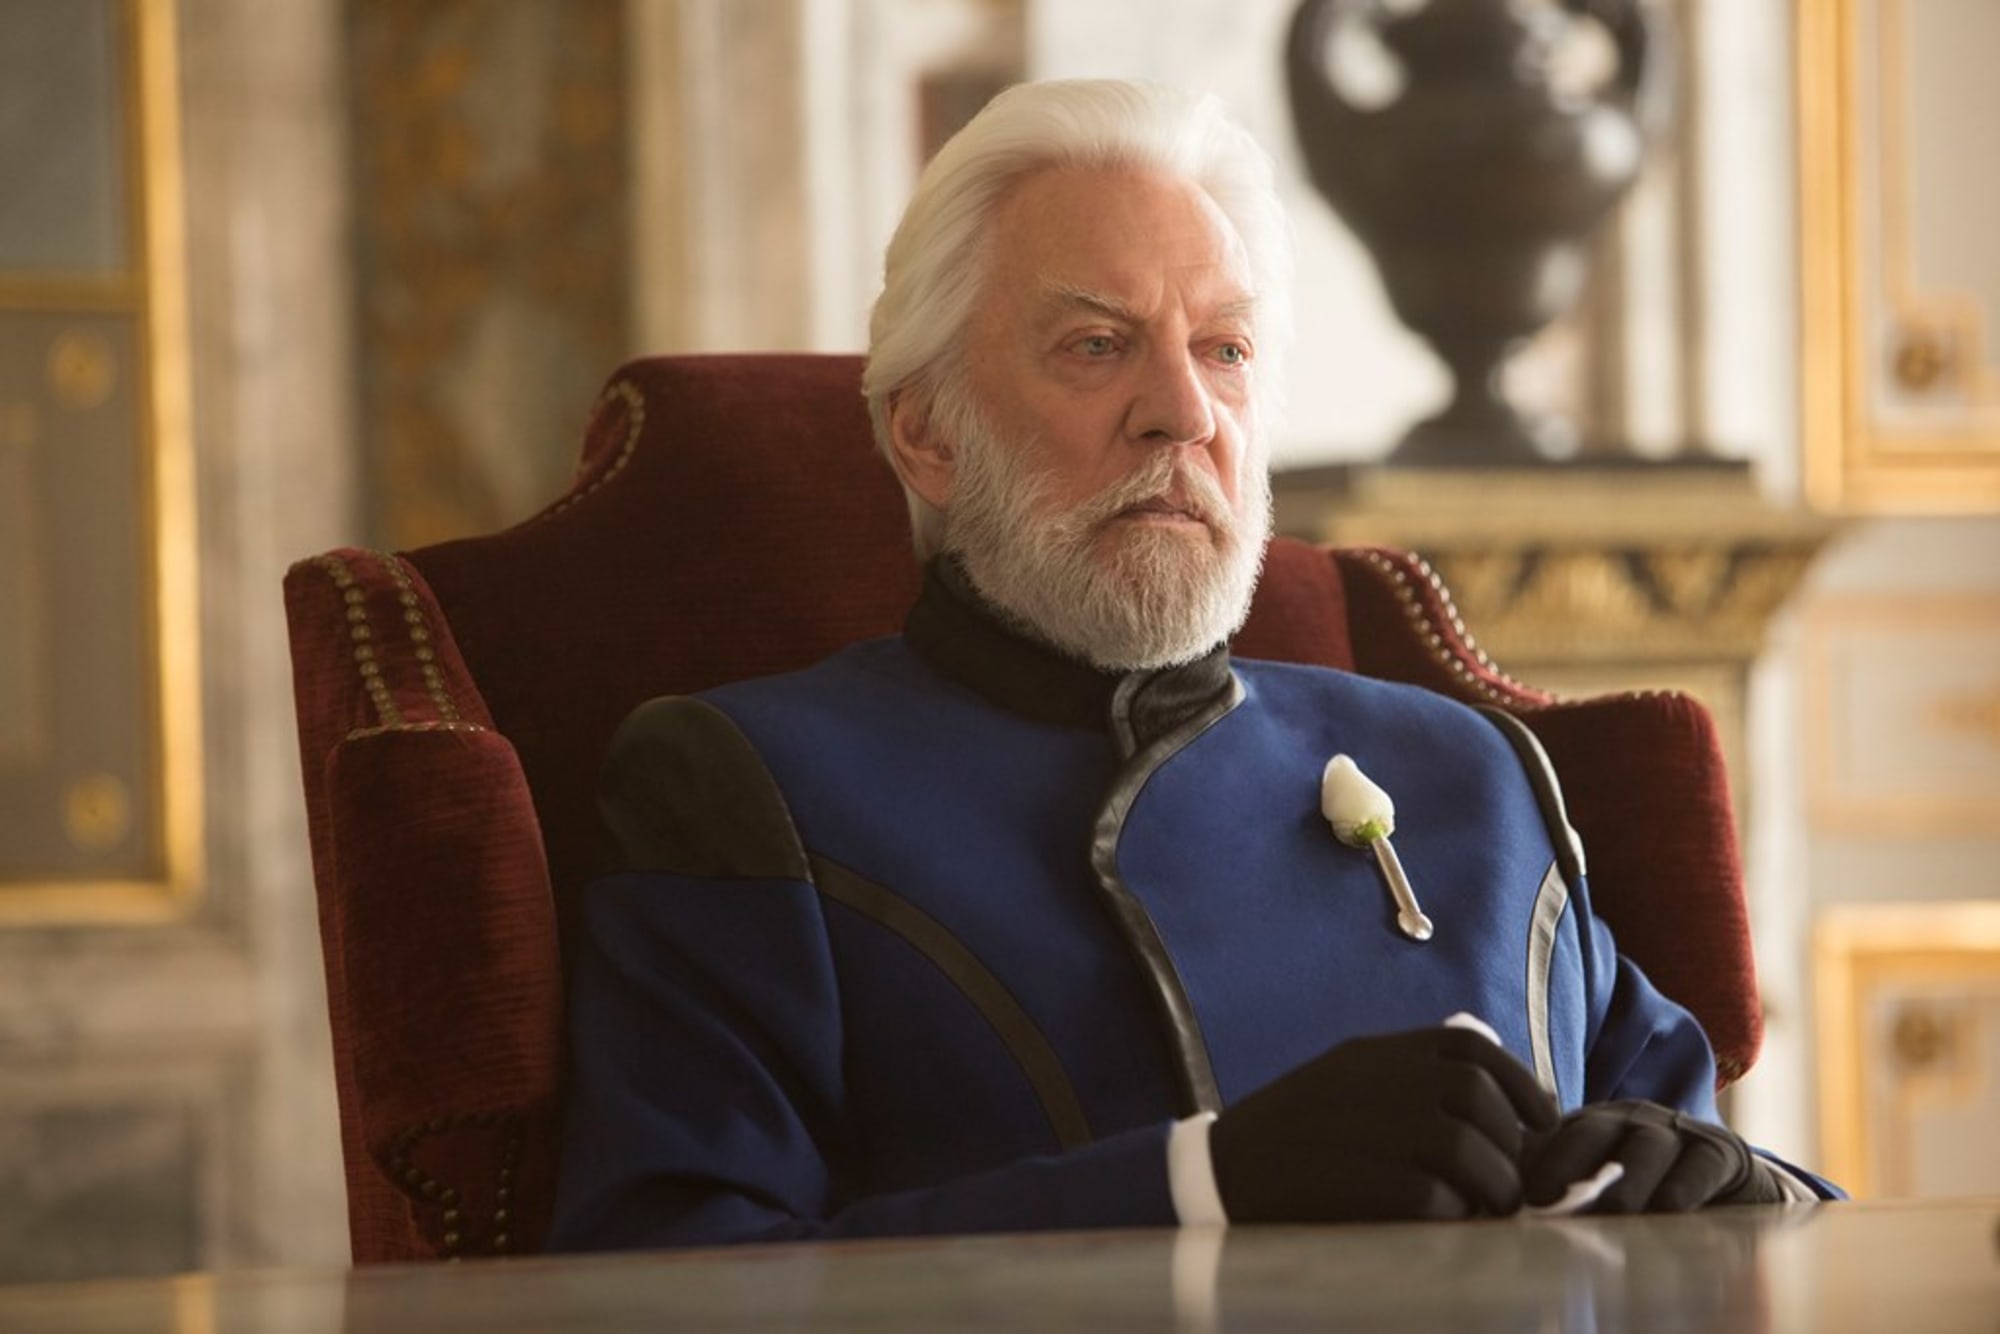 Is President Snow the best protagonist for the Hunger Games prequel?